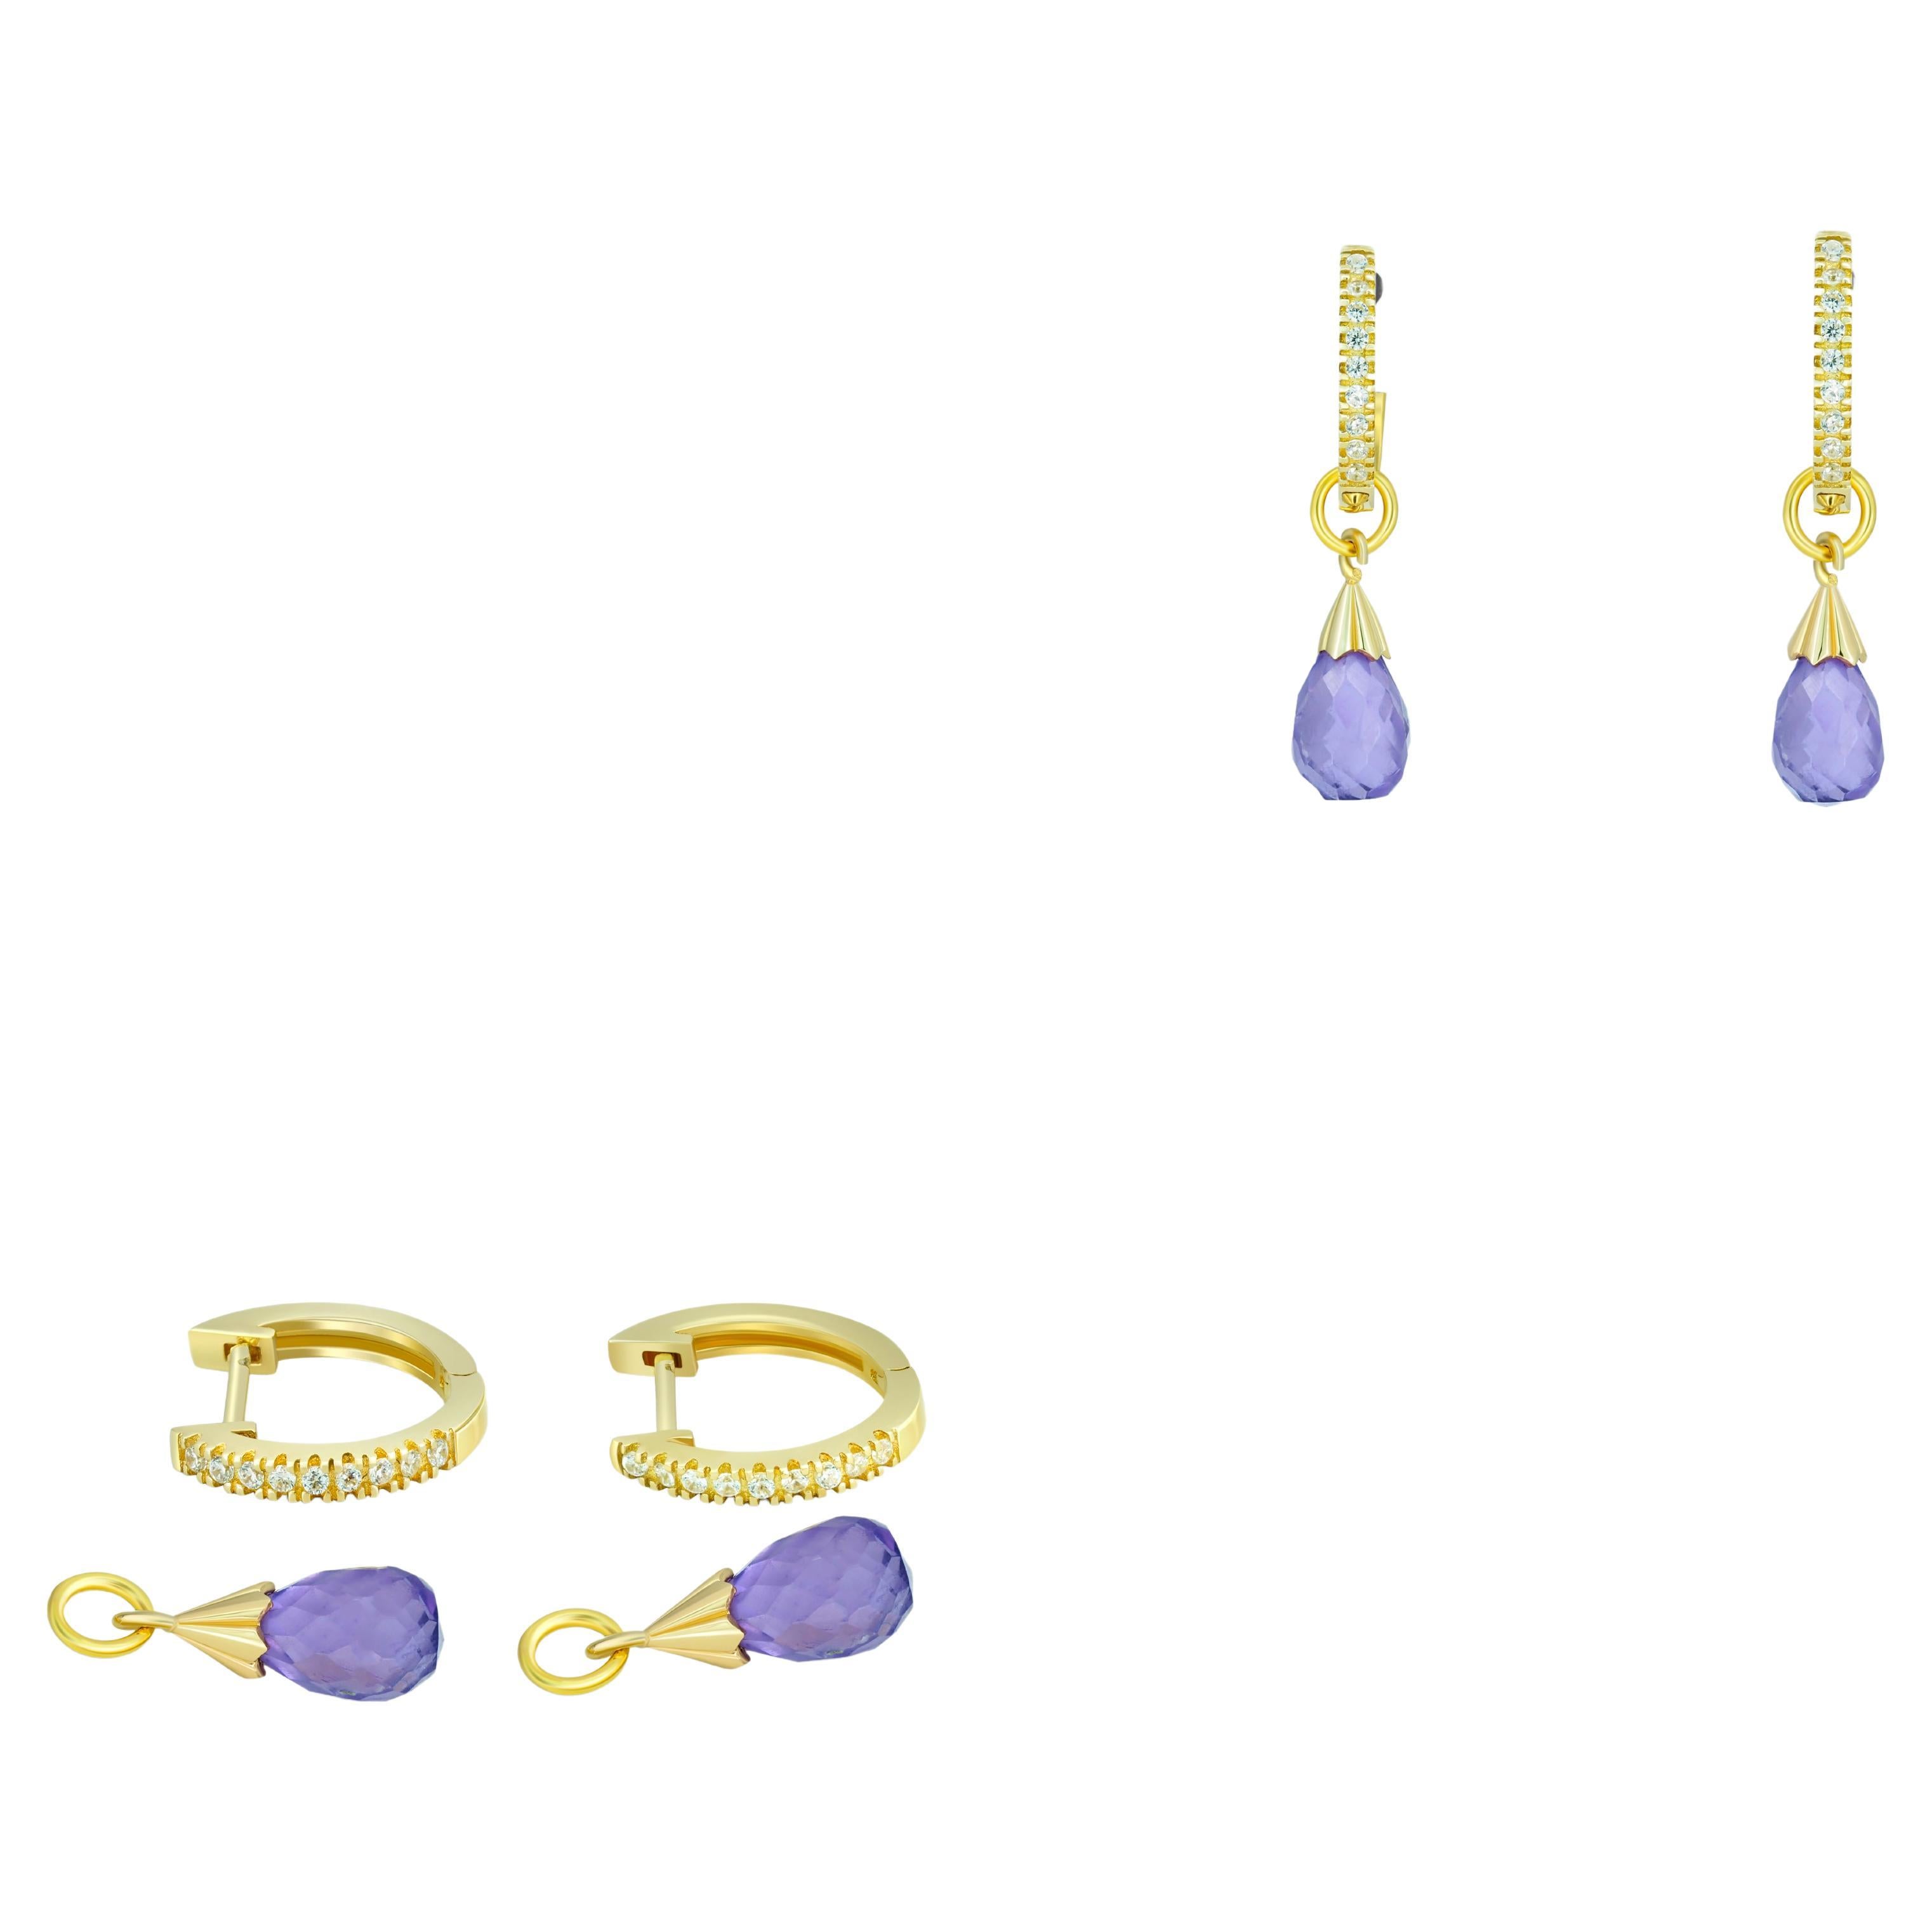 Diamond Hoop Earrings and Amethyst Briolette Charms in 14k Gold For Sale